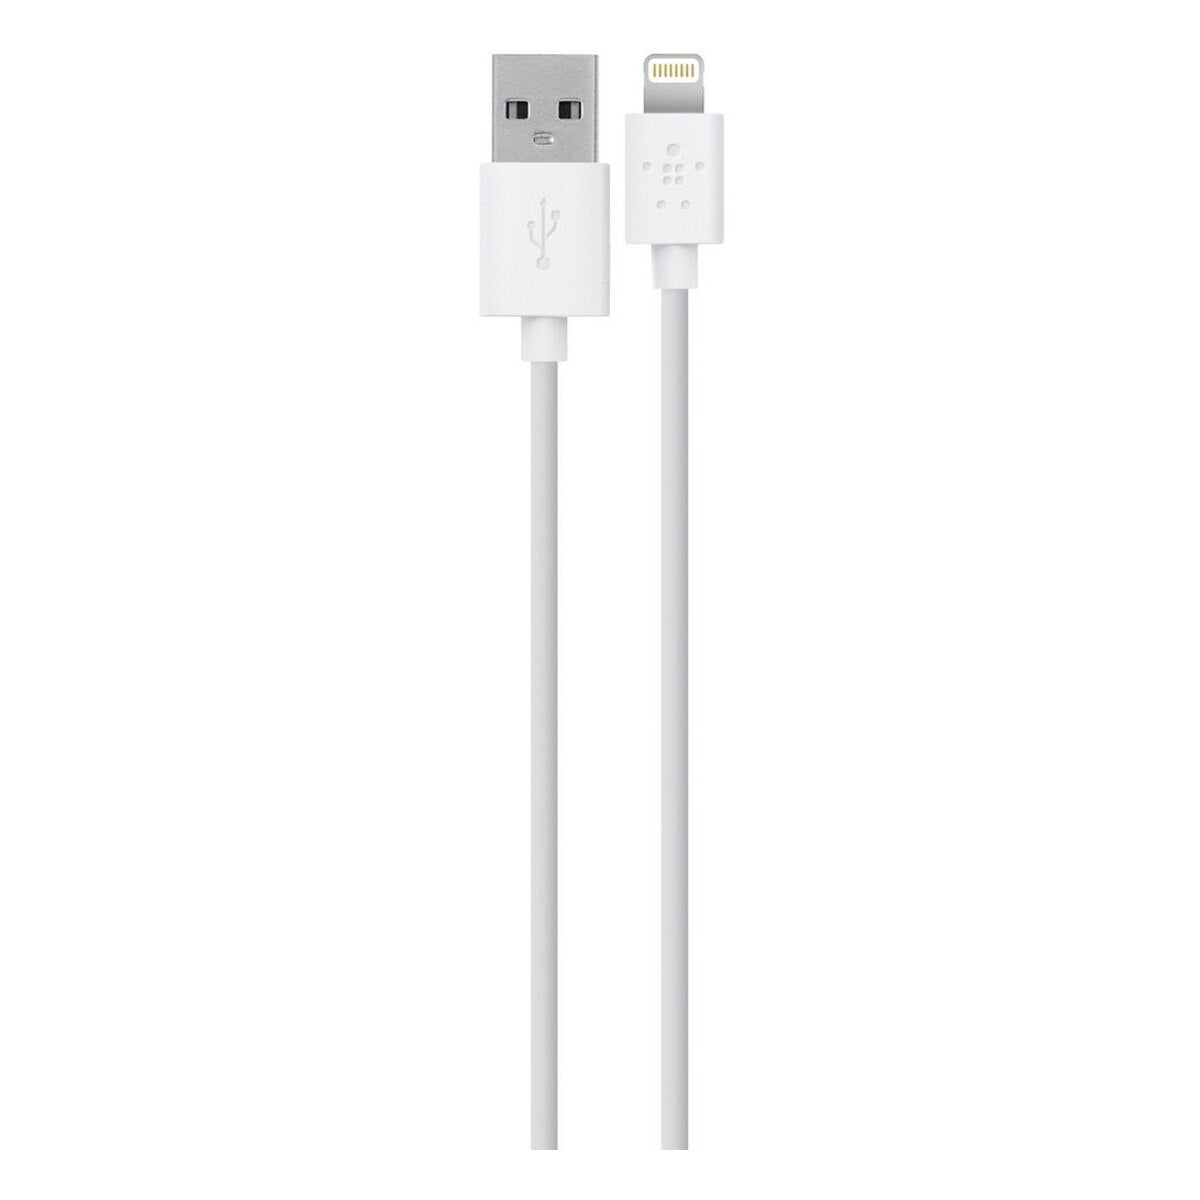 BELKING LIGHTNING TO USB CABLE